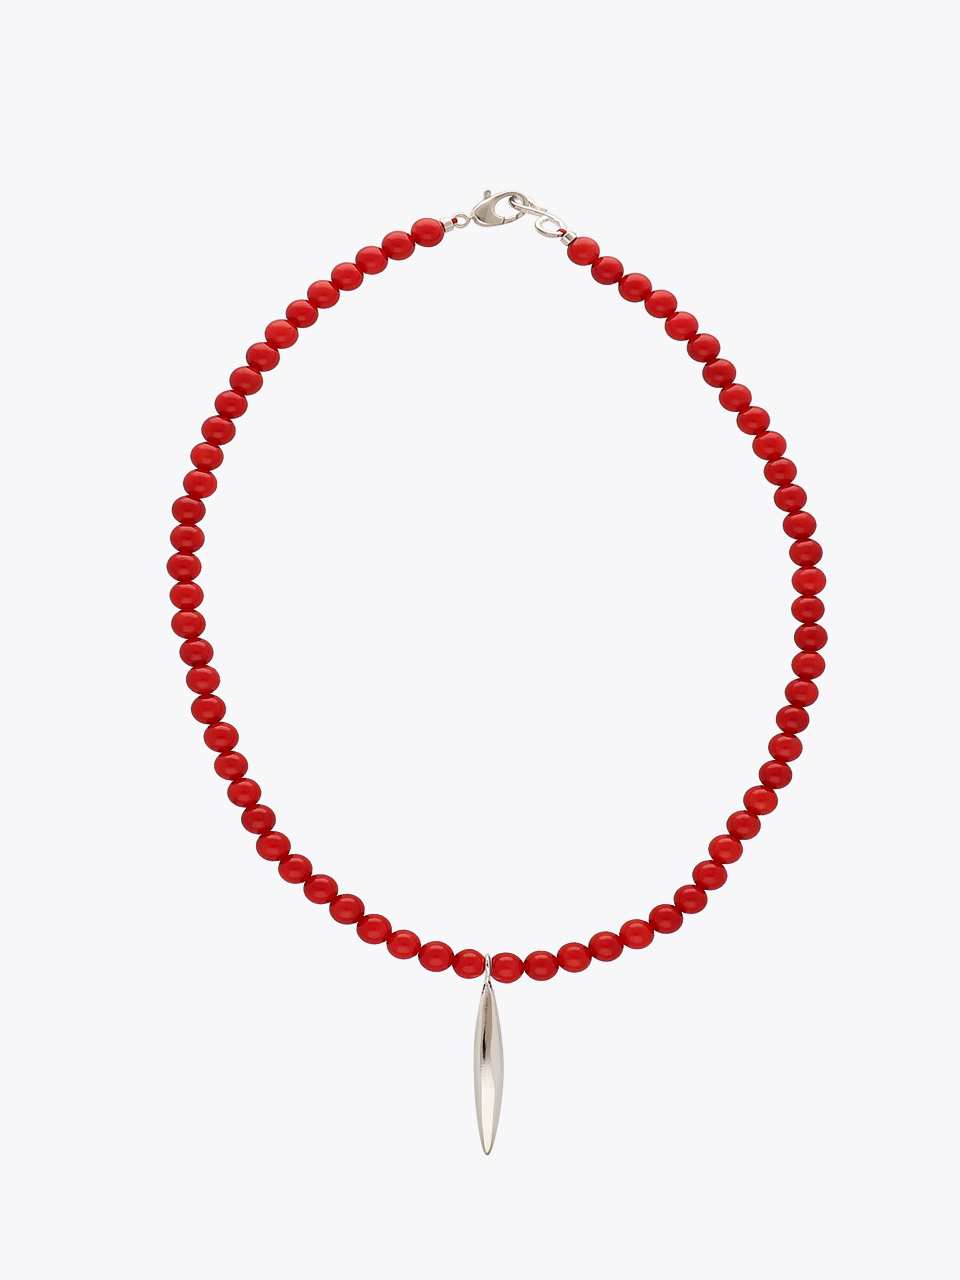 Red seed necklace